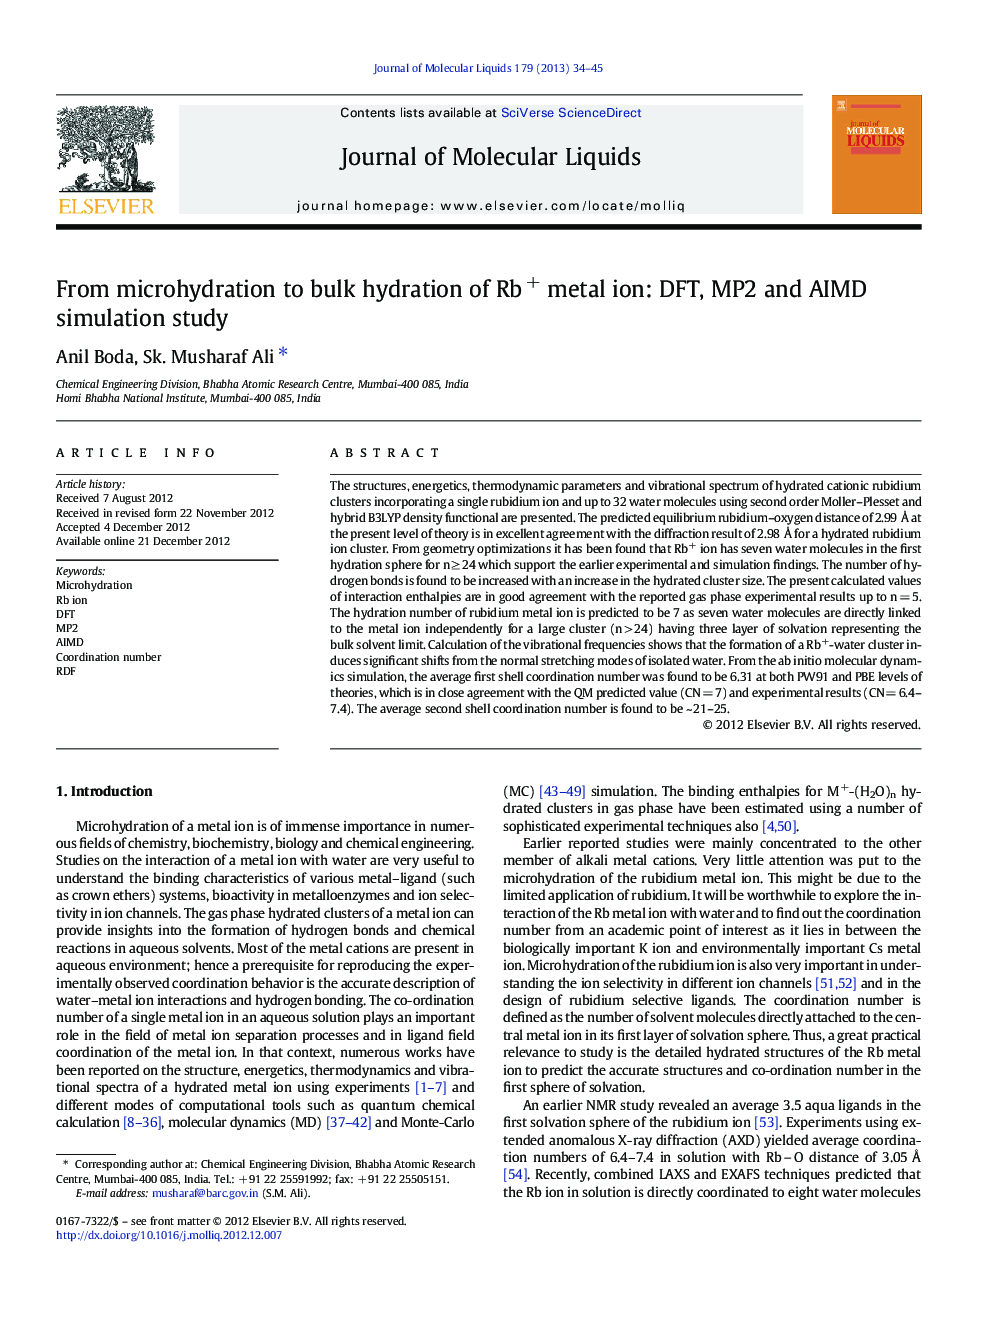 From microhydration to bulk hydration of Rb+ metal ion: DFT, MP2 and AIMD simulation study